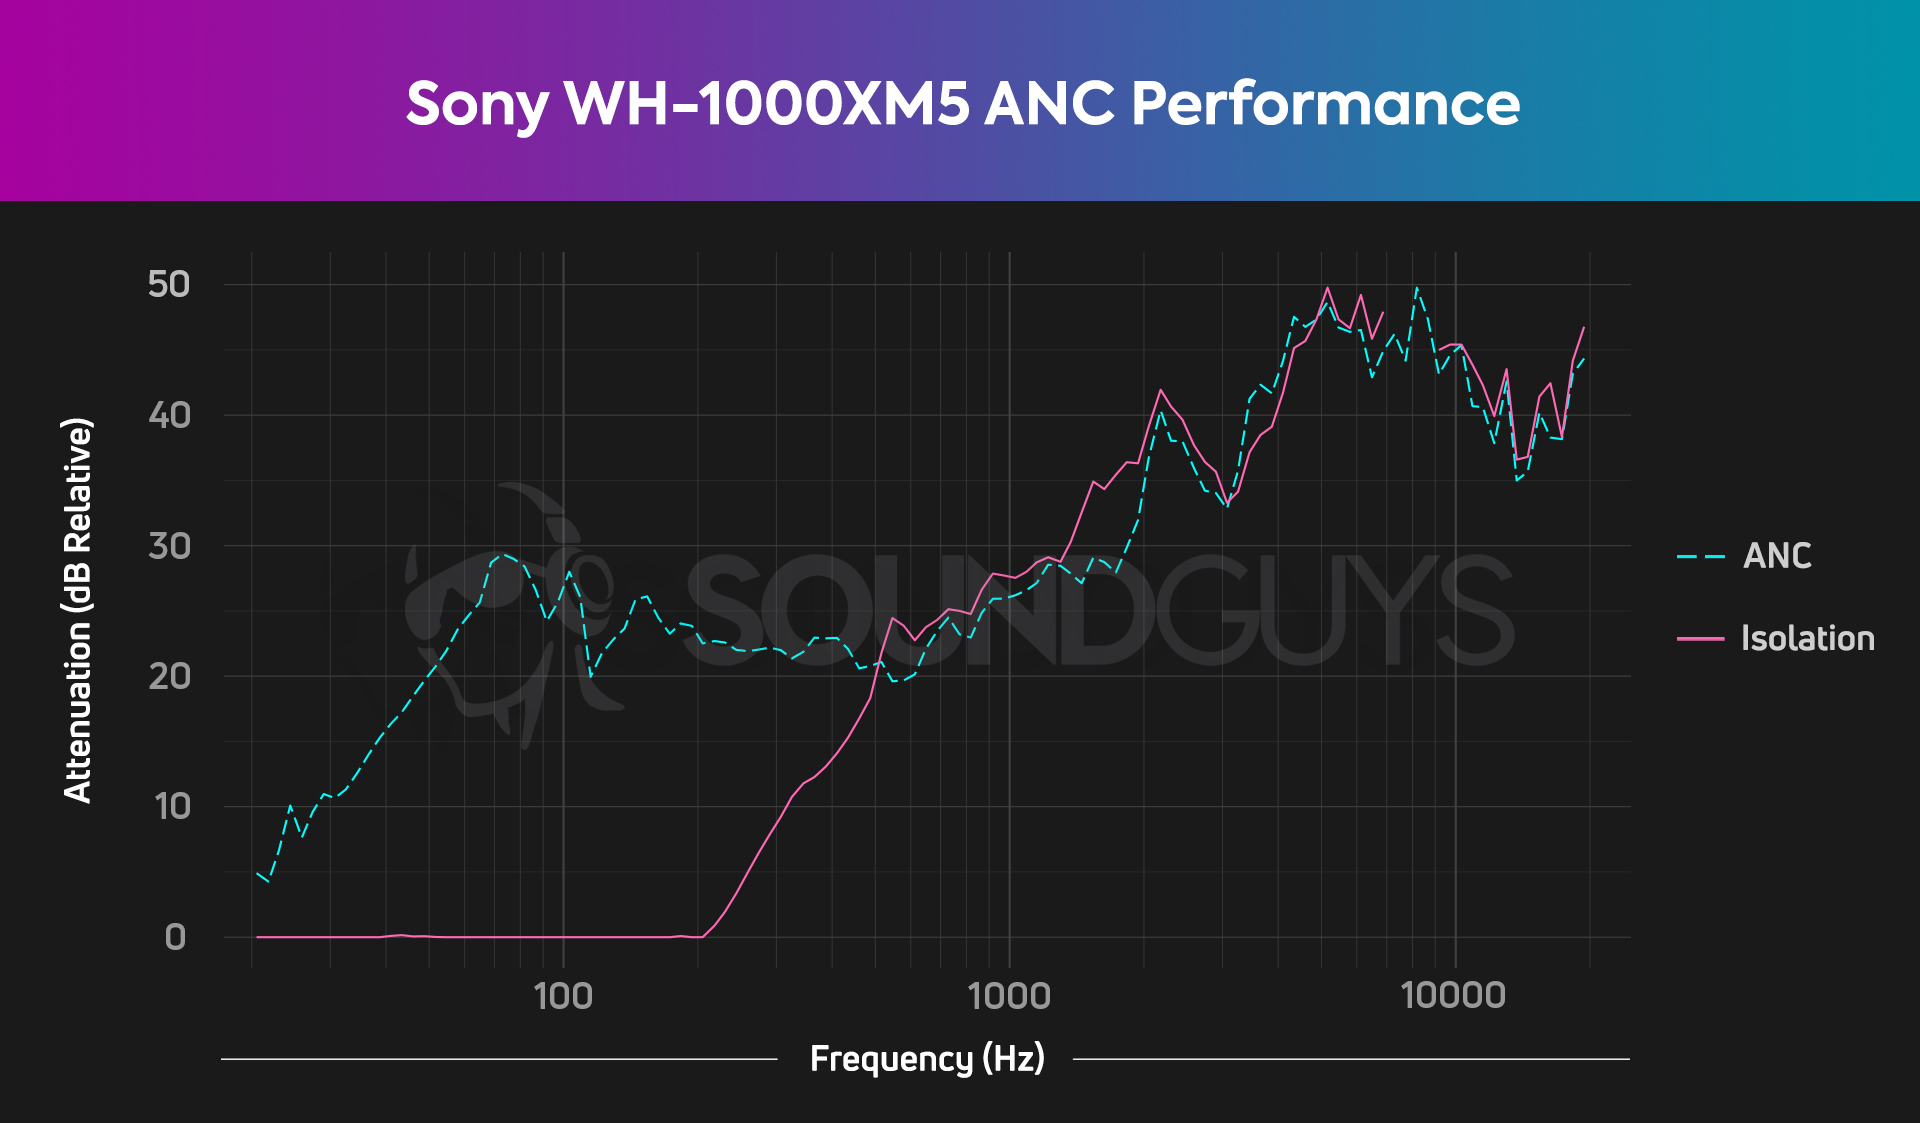 The Sony WH-1000XM5's ANC unit does a good job of canceling noise, but it also isolates very well.